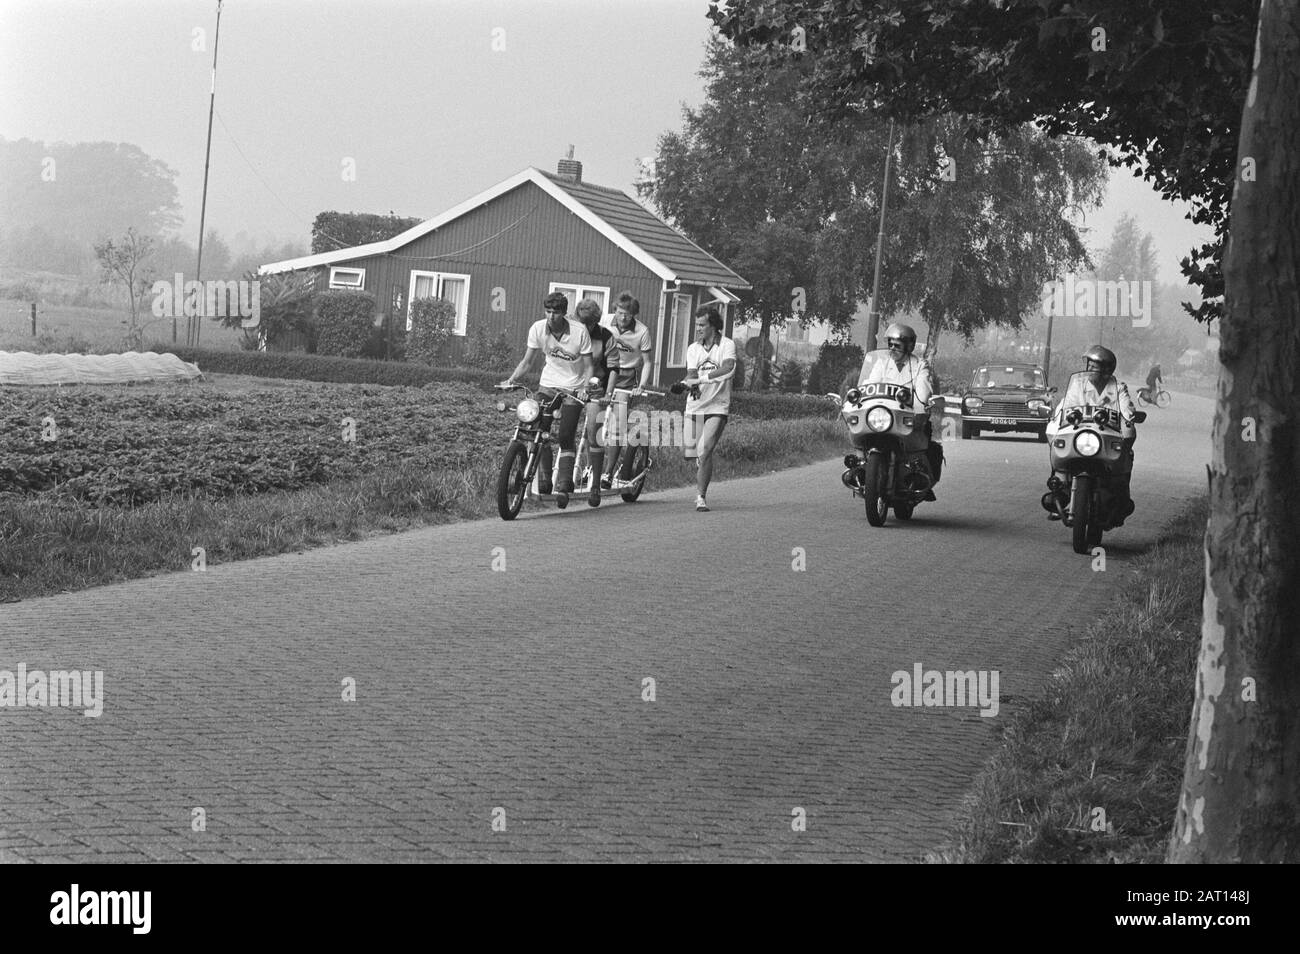 Autoped-tour to Utrecht in Breda started (fourth time)  A four-person autoped during the autoped-tour from Breda to Utrecht accompanied by two motorcyclists Date: 9 September 1981 Location: Breda, Noord-Brabant, Utrecht (province), Utrecht (city) Keywords: autopeds, motorcycles, travel, students Stock Photo